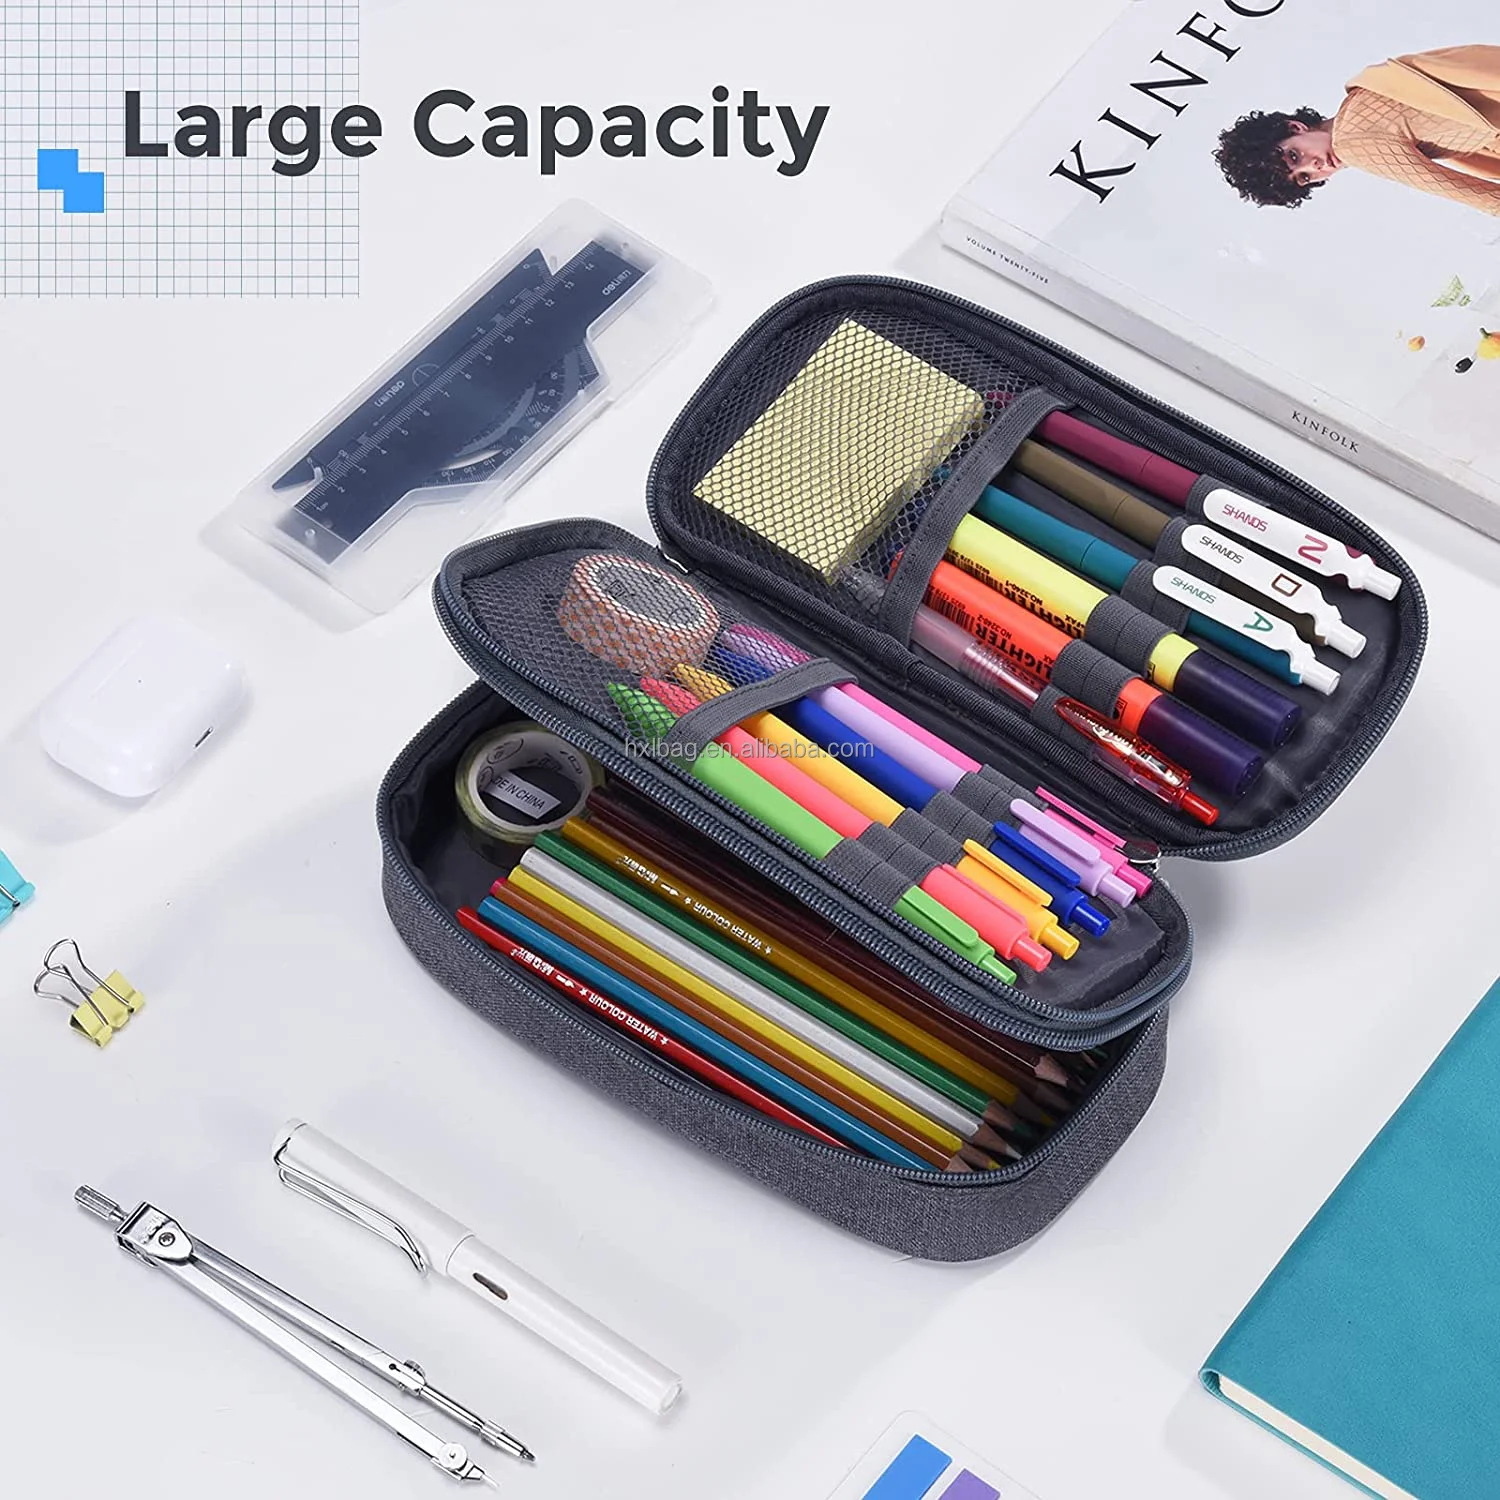 Multifunctional Pencil Pen Marker Case Pouch Bag Holder Small Cute Capacity for High Middle Primary School Student Aesthetic Teen Portable Candy Design Gray 